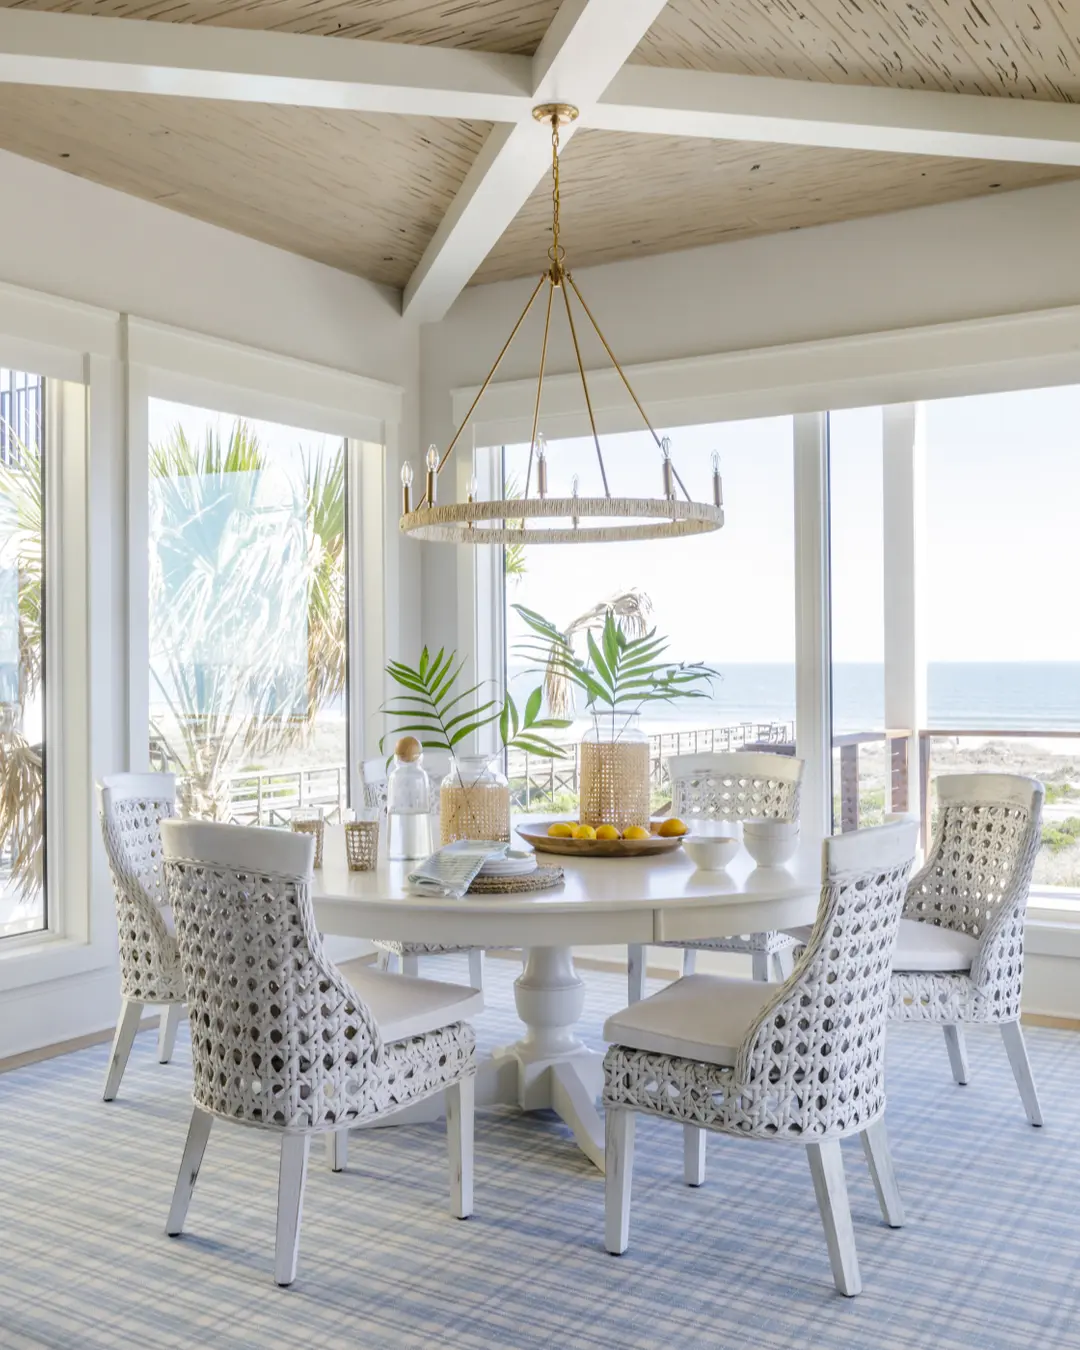 large glass windows and doors add an airy and bright feel to this coastal-inspired dining room interior. 